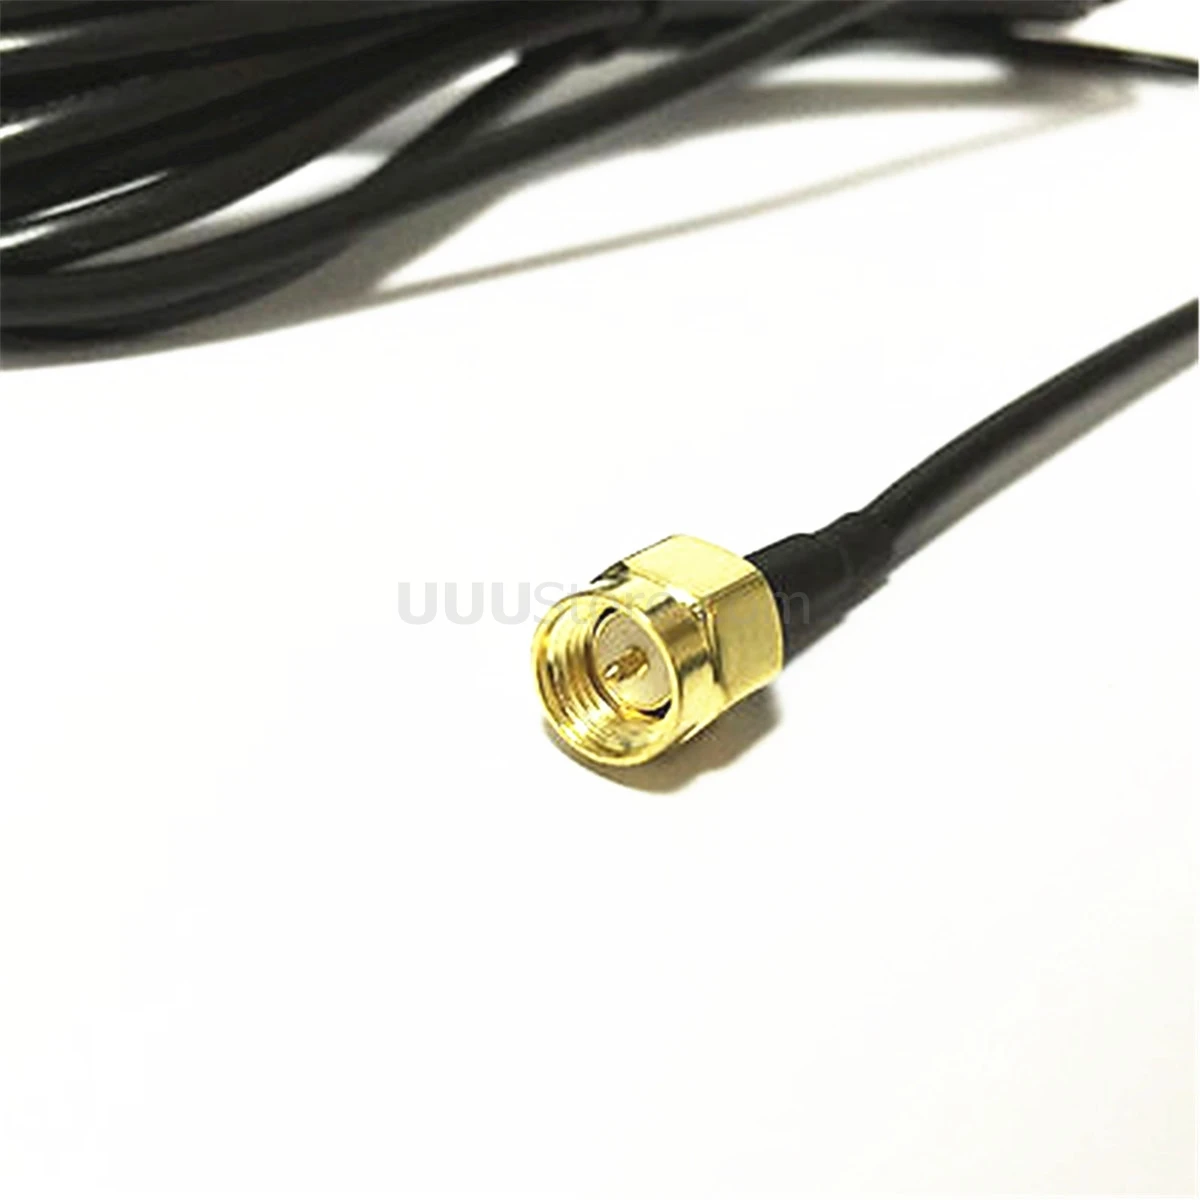 433Mhz 12dbi high gain sucker aerial Antenna 3M cable SMA For 433Mhz 3DR Radio Telemetry 5